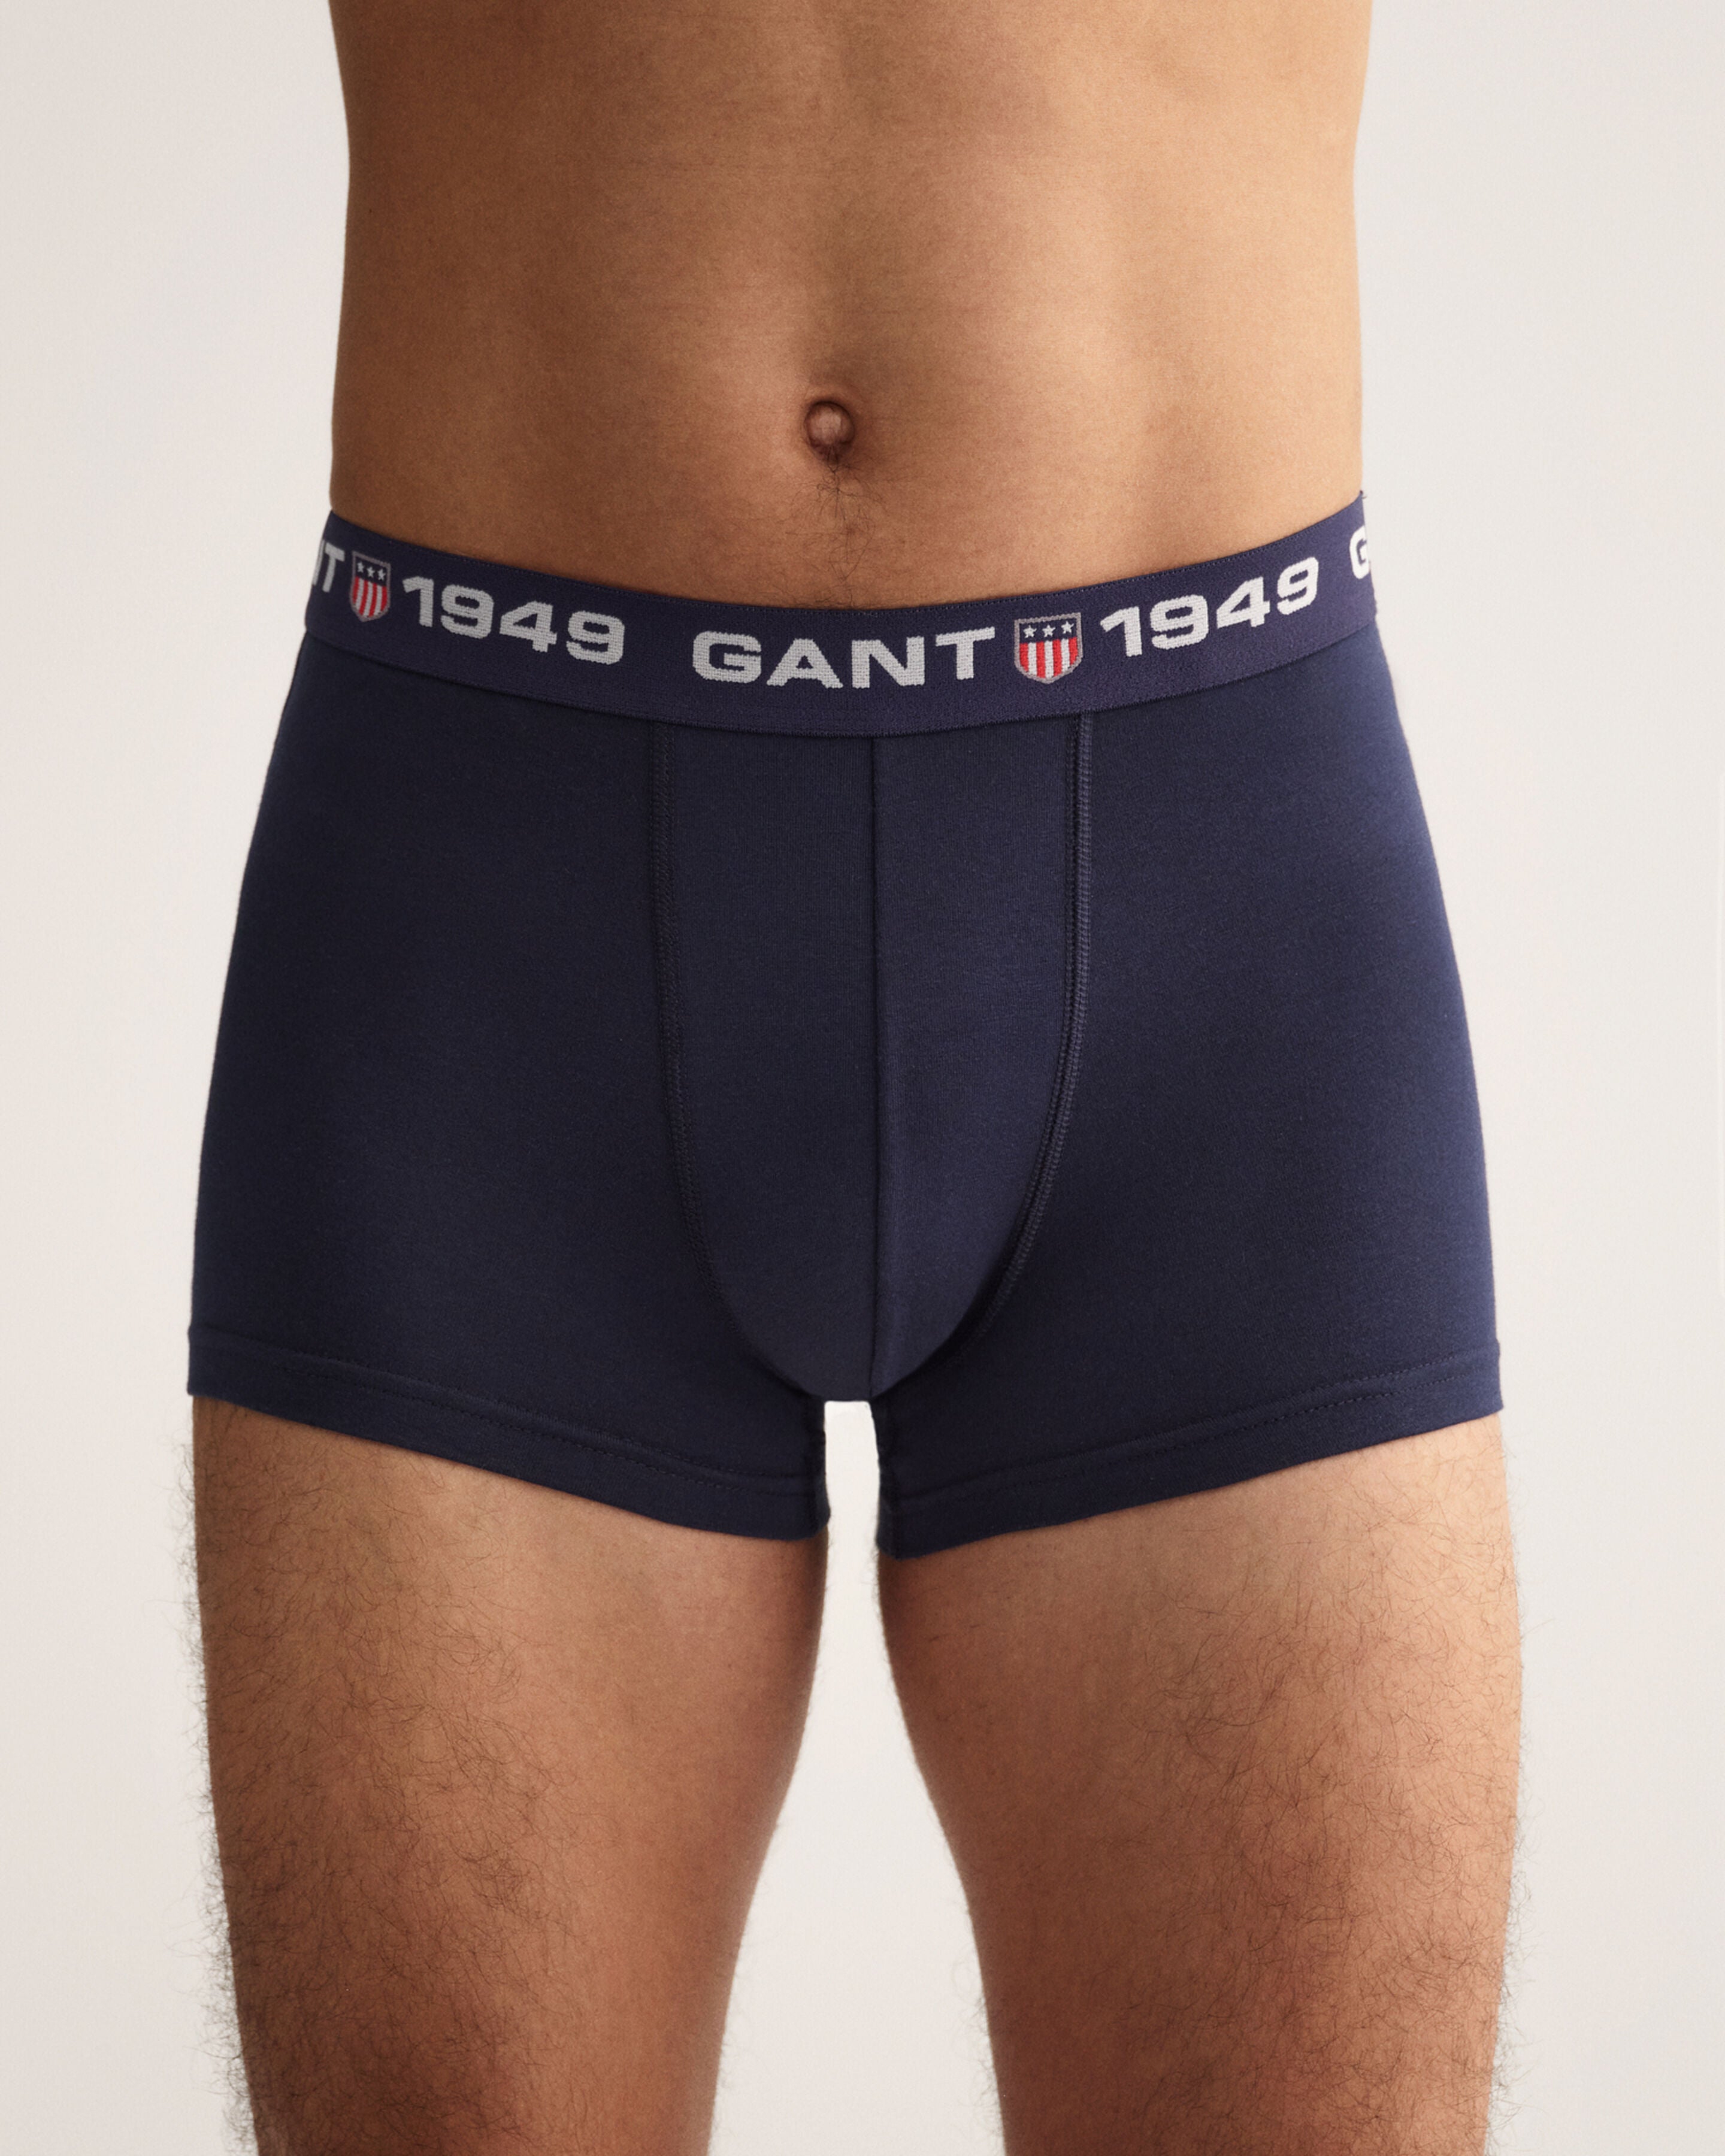 GANT - 3-Pack Retro Shield Trunks in Blue, Red and Navy 902233453 418